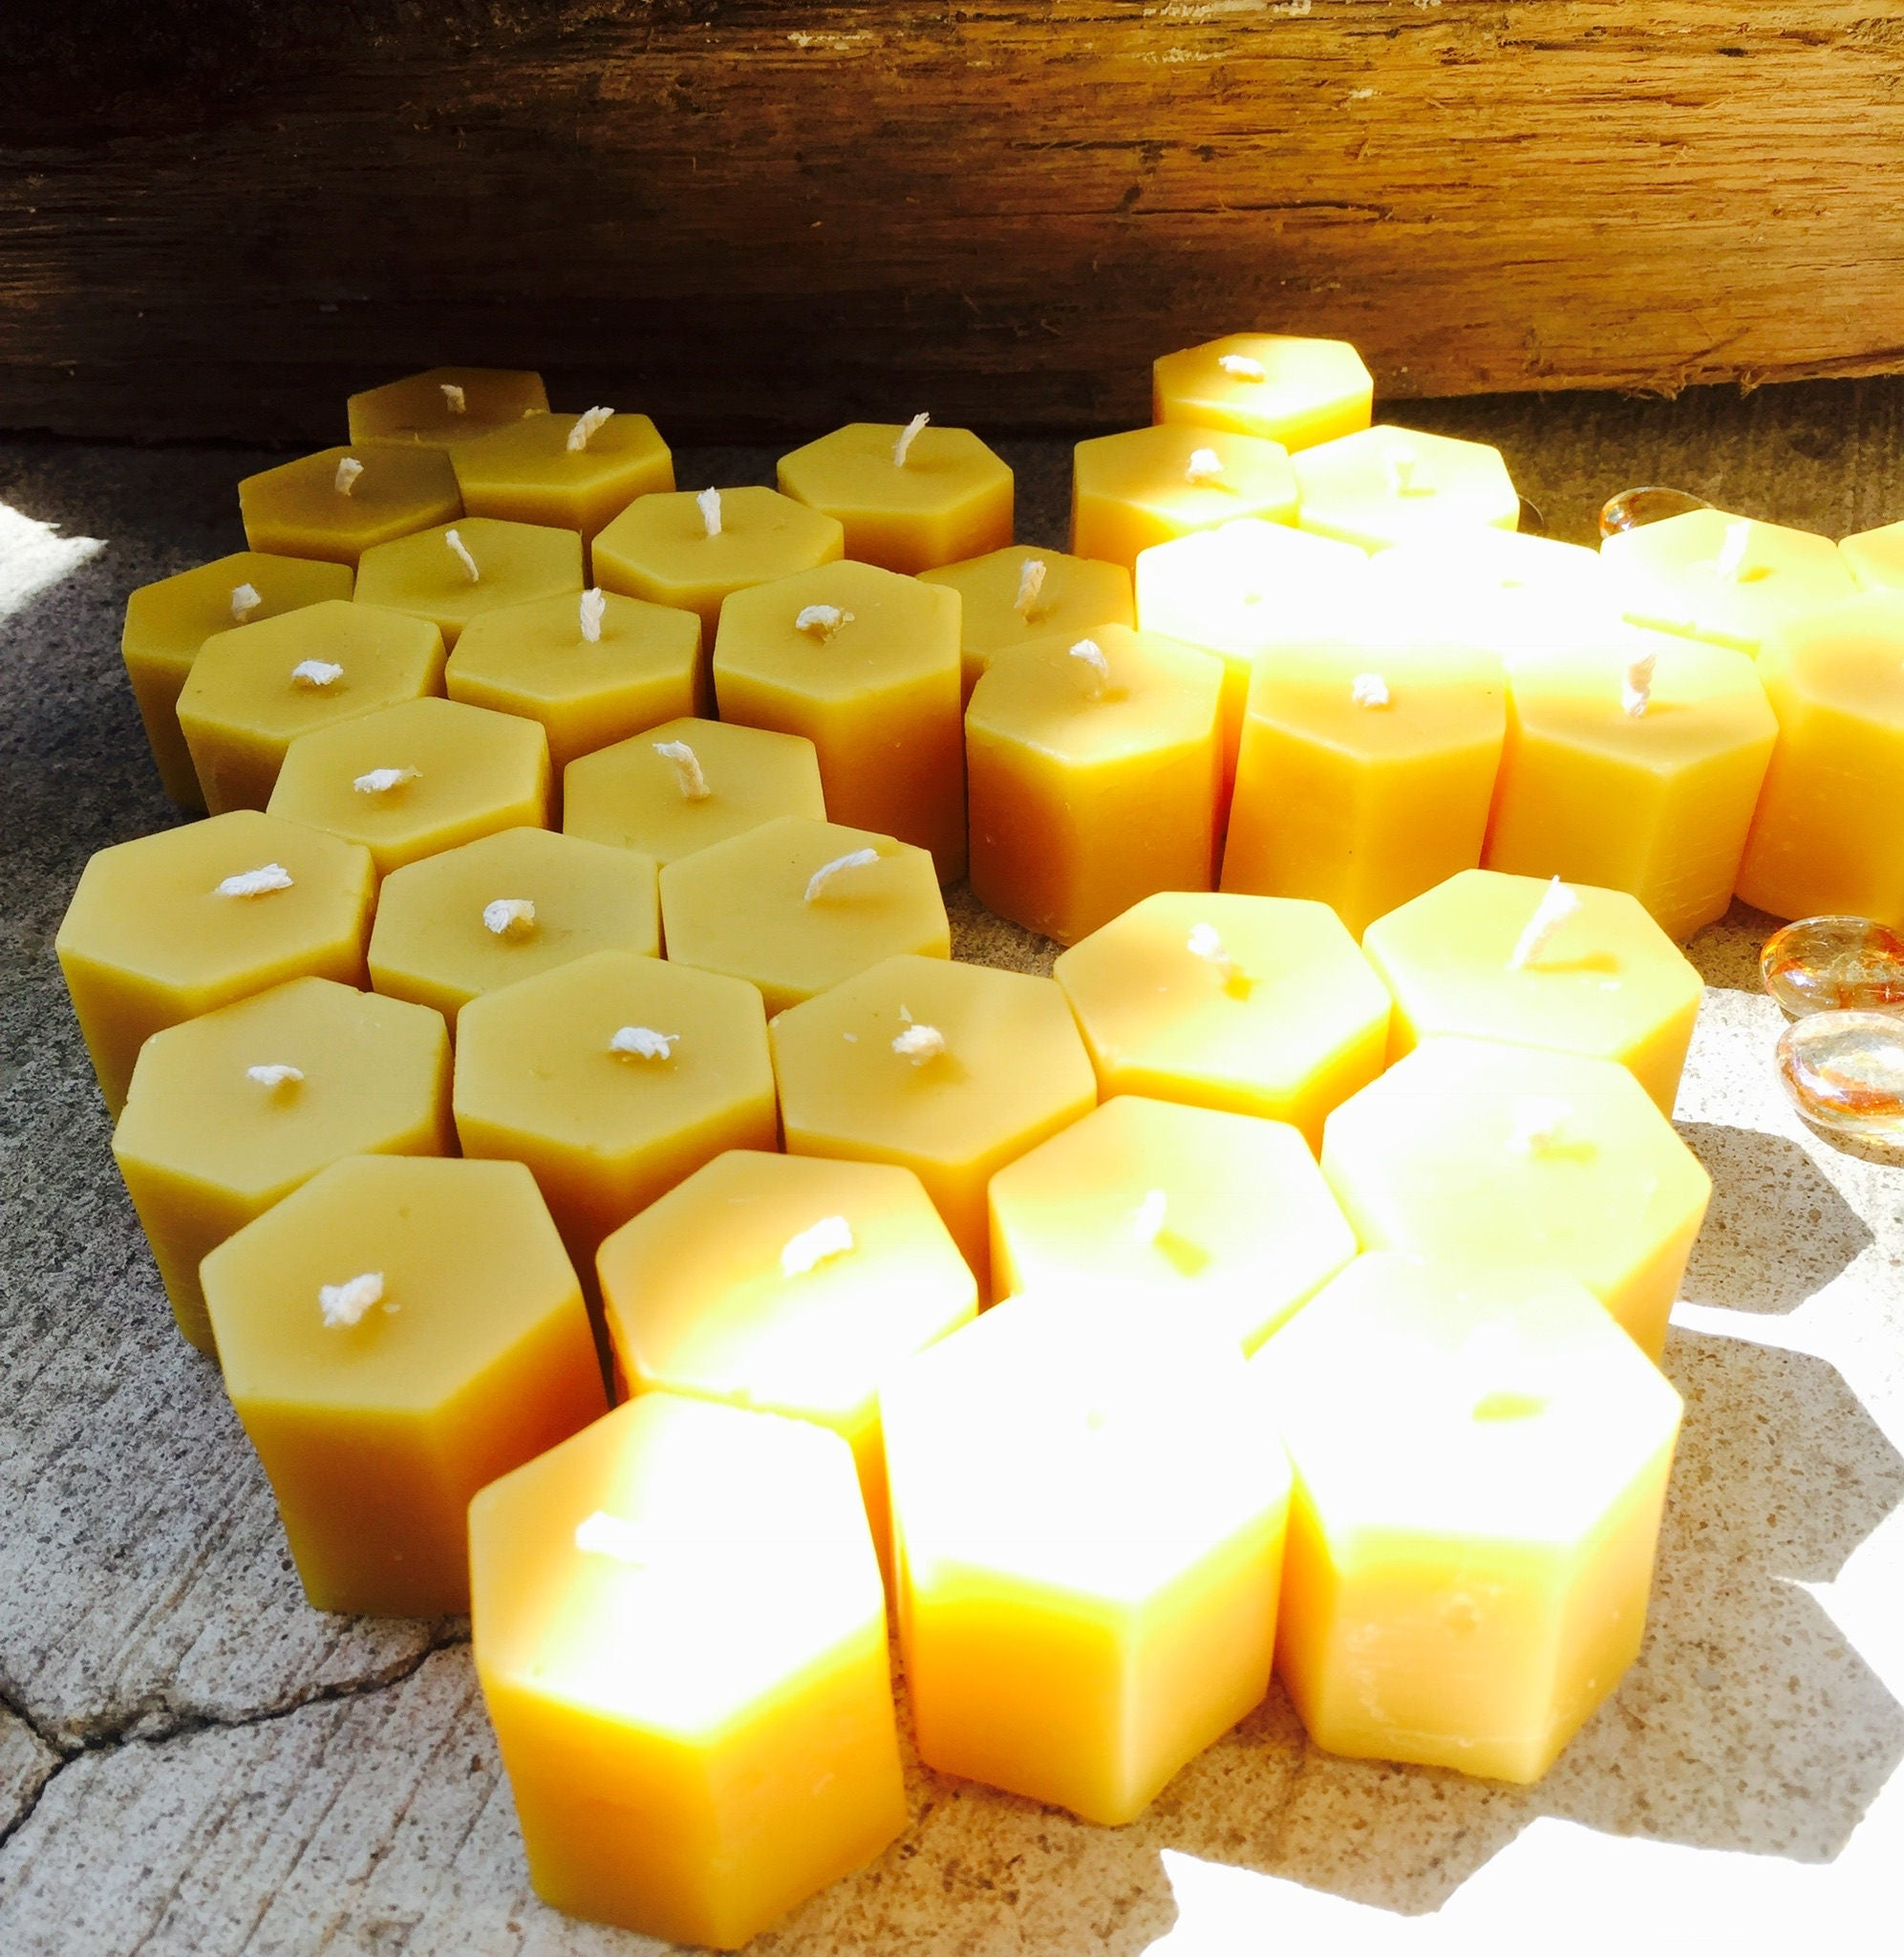 100% Pure Beeswax Candle-9ozs of pure beeswax-scented or  unscented-aromatherapy beeswax candle